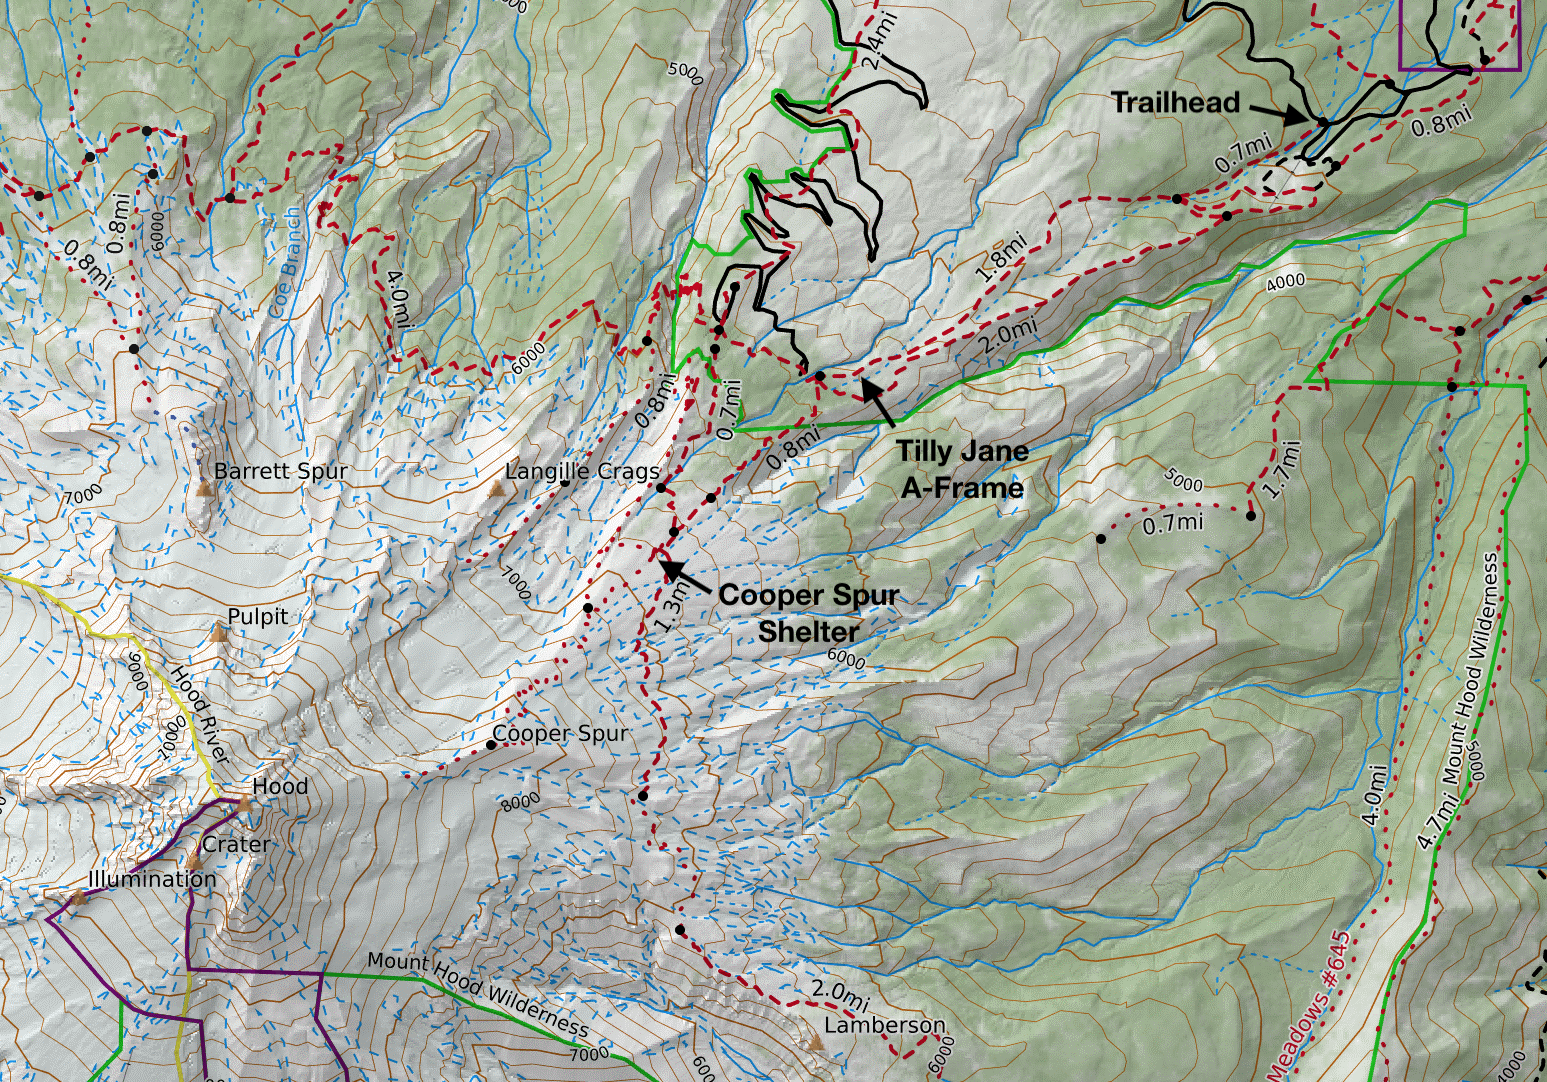 a topographic map of the northeast side of Mt Hood, showing the Tilly Jane and Cooper Spur trails